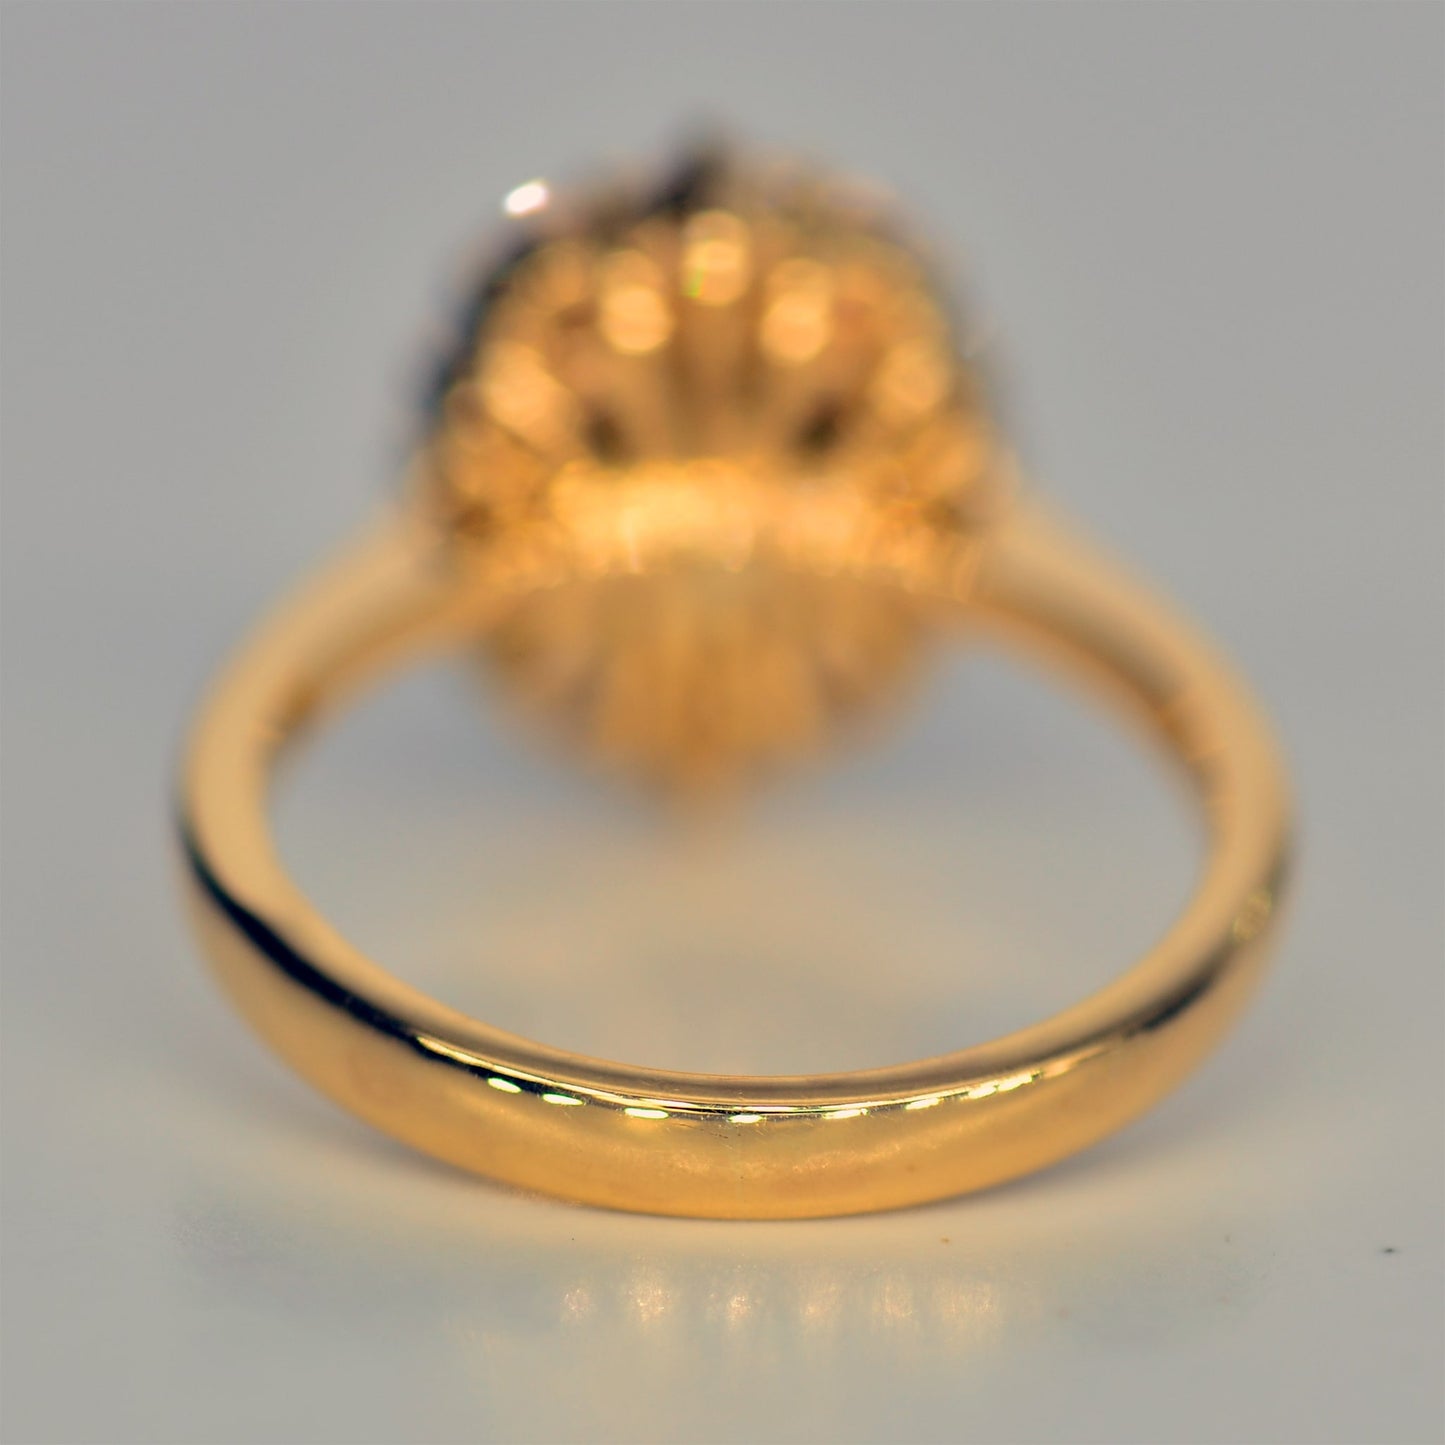 The Orion Ring